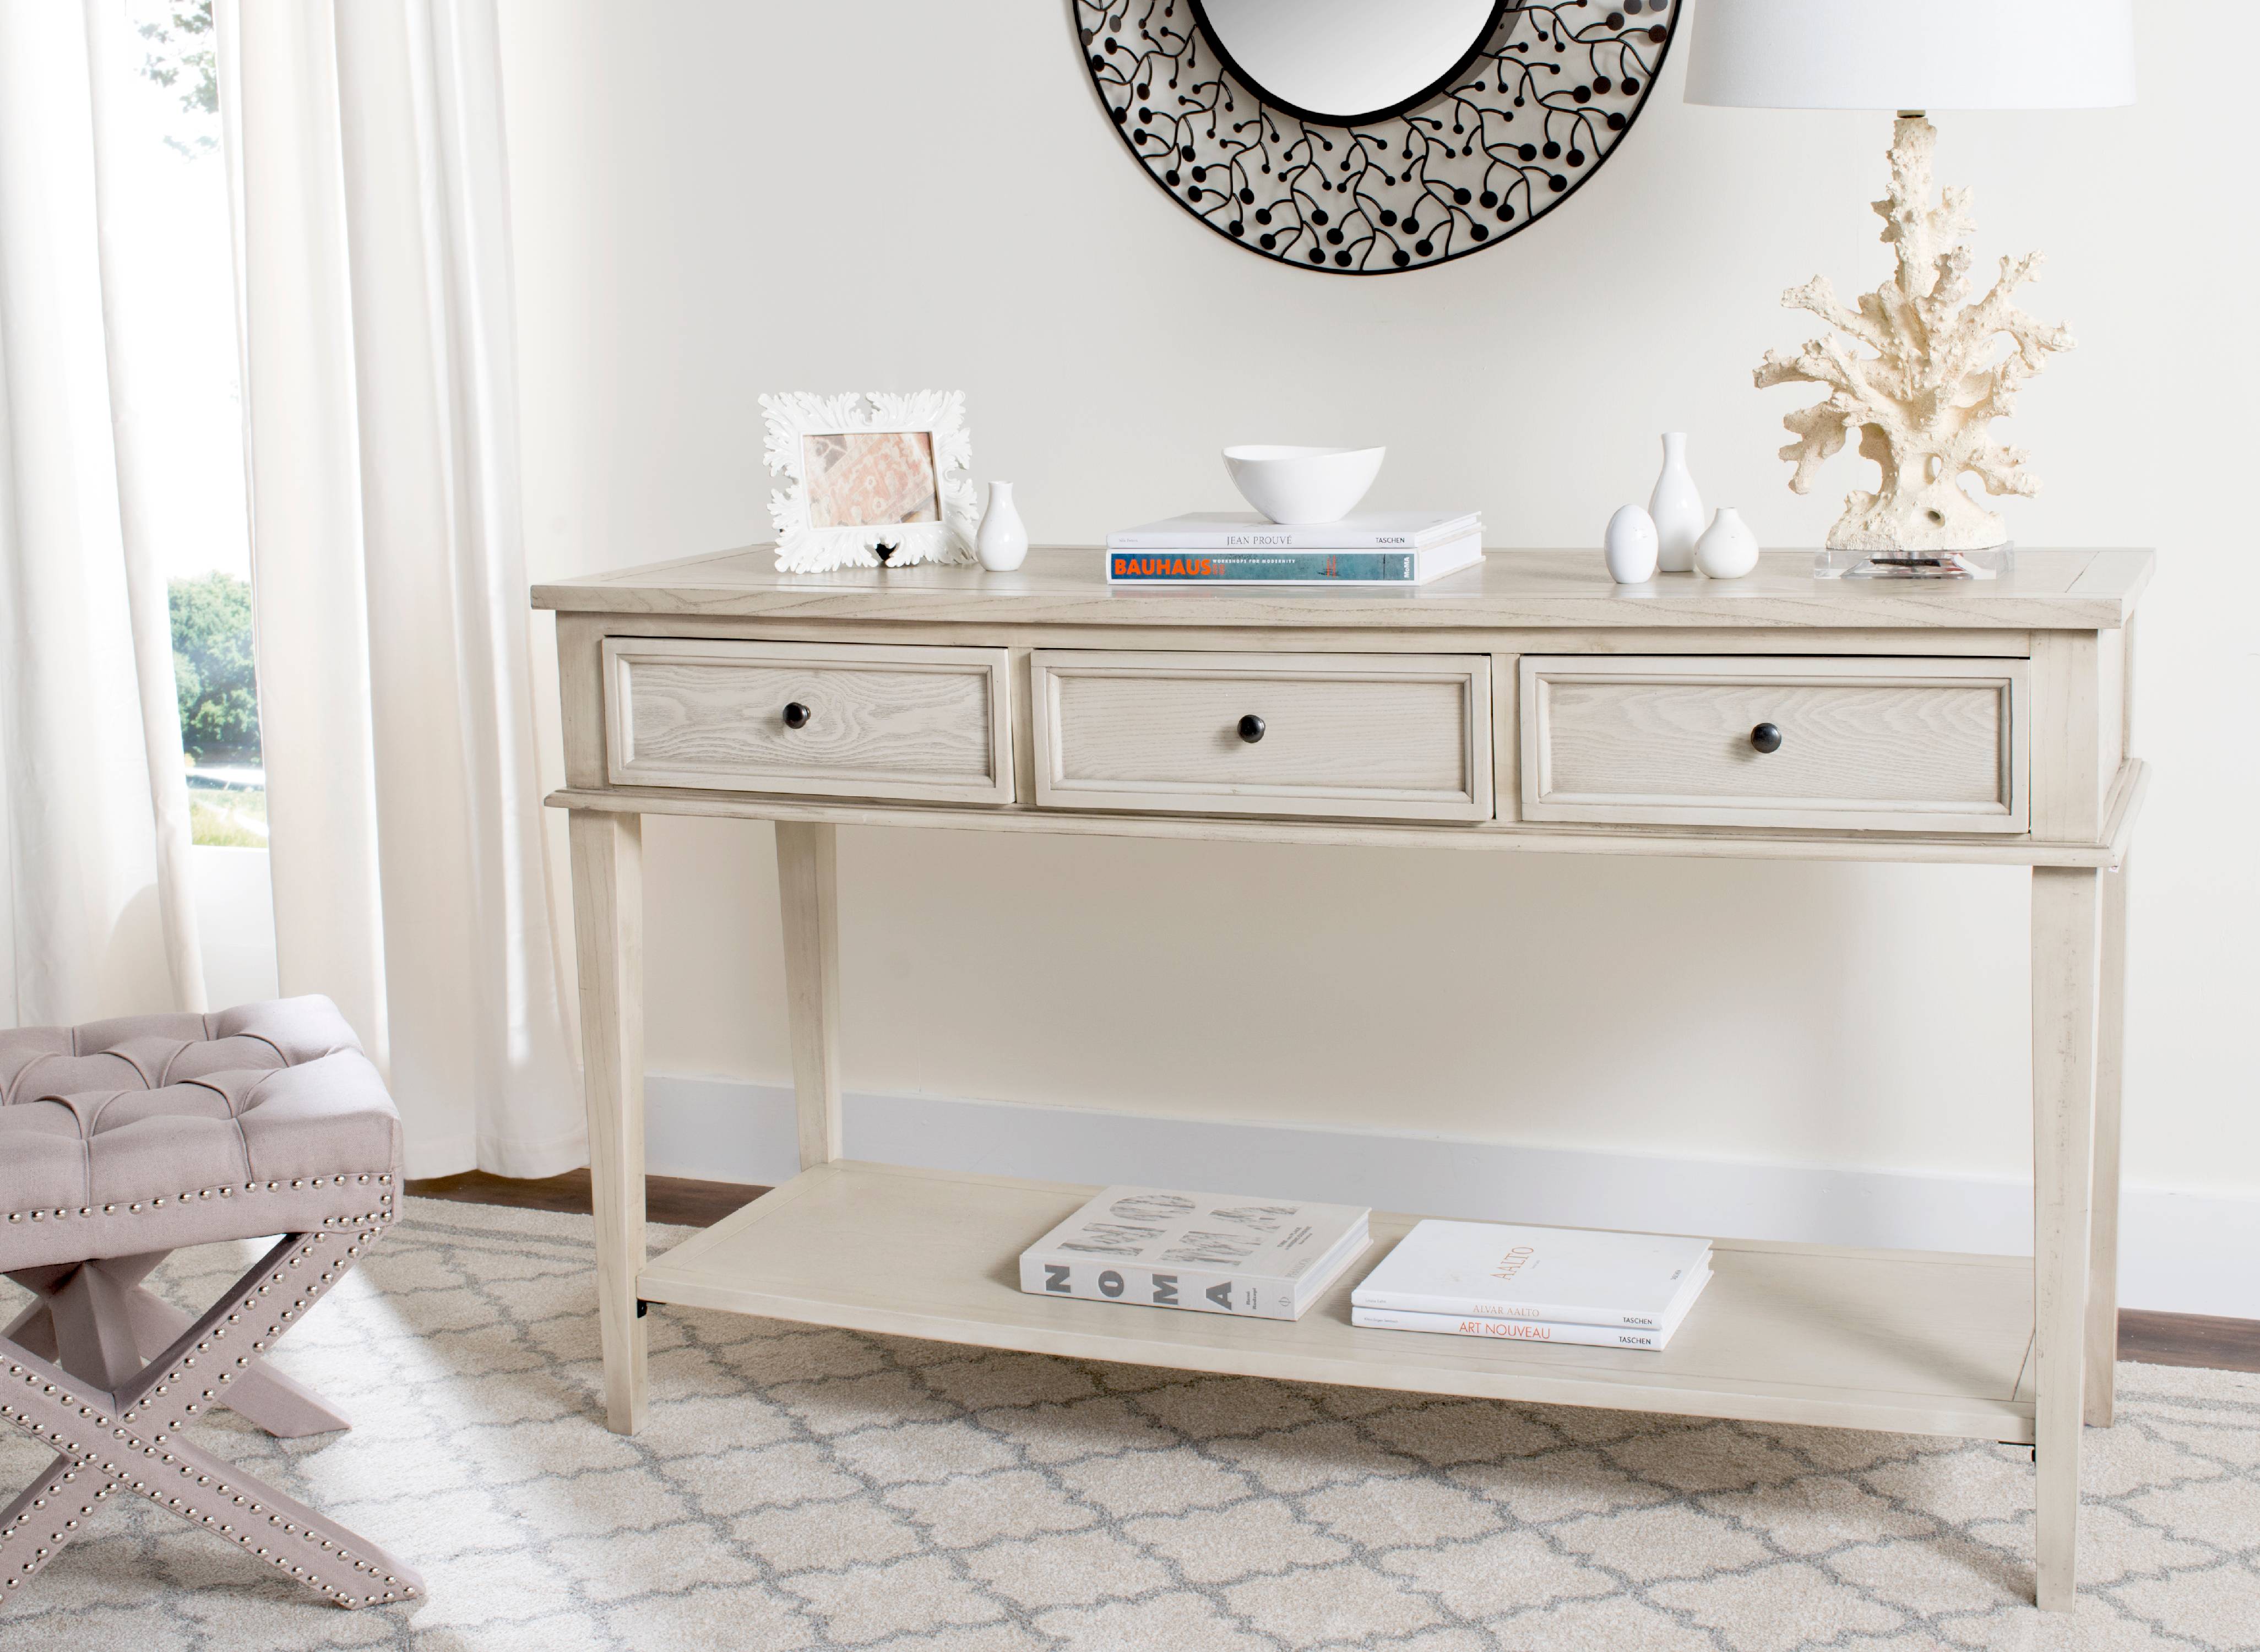 SAFAVIEH Manelin Rustic Console with 3 Storage Drawers, White Wash - image 1 of 4